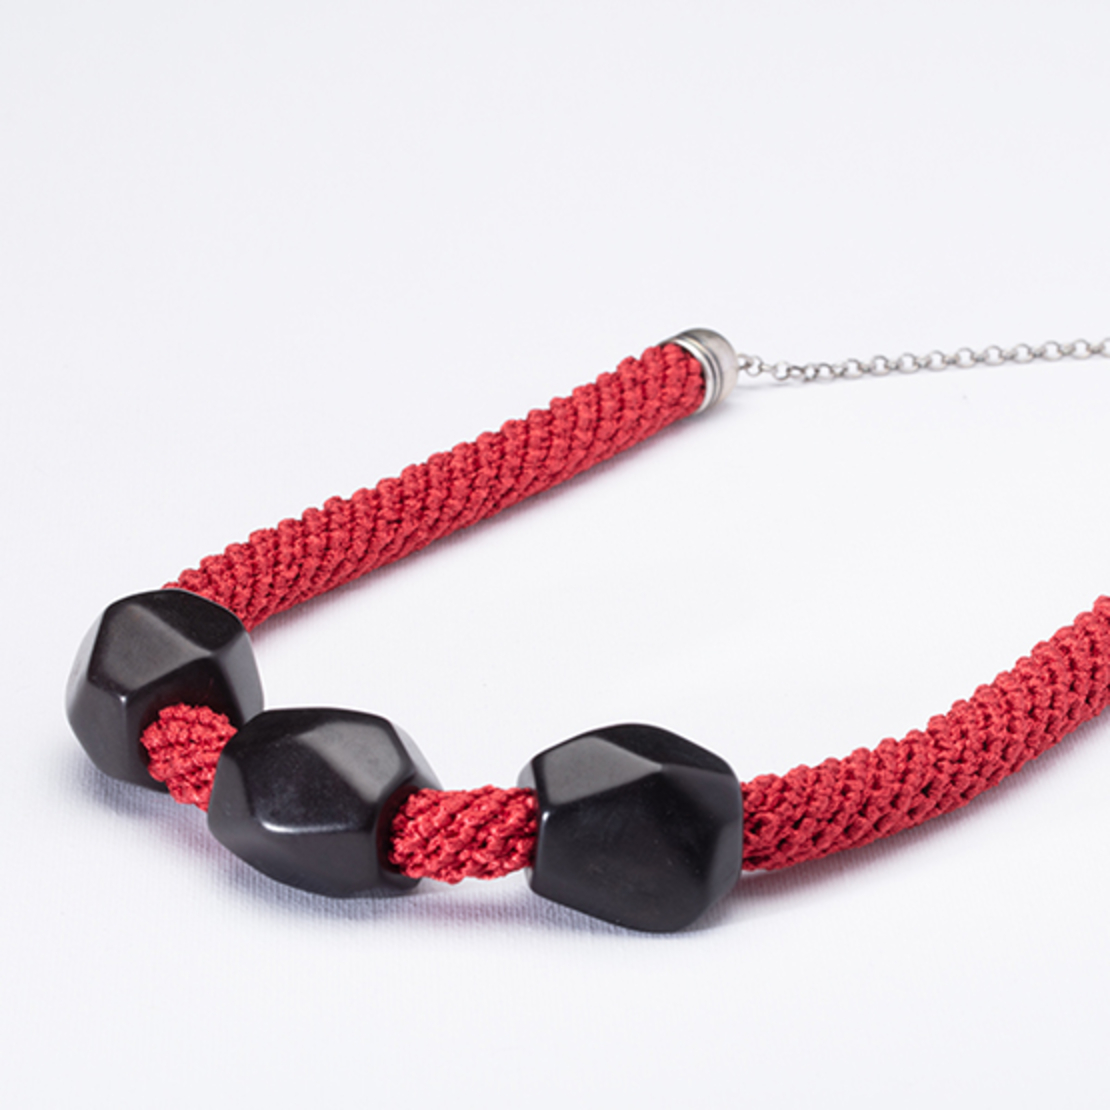 Red & Black Tagoa Beads Necklace | Talya